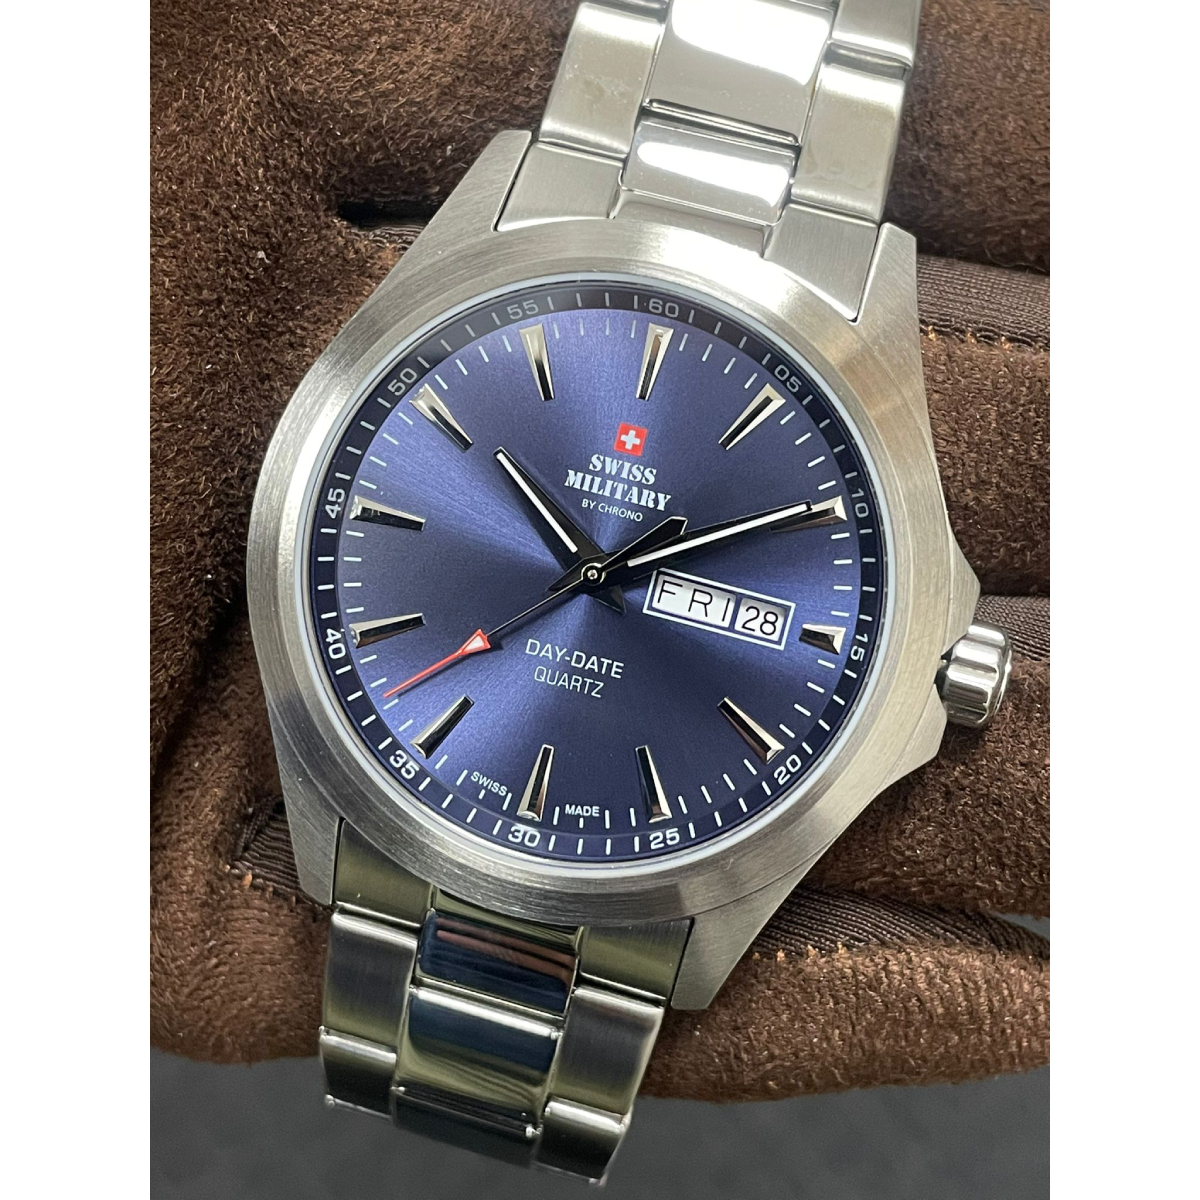 SWISS-MILITARY GENT’S WATCH SMP36040-24